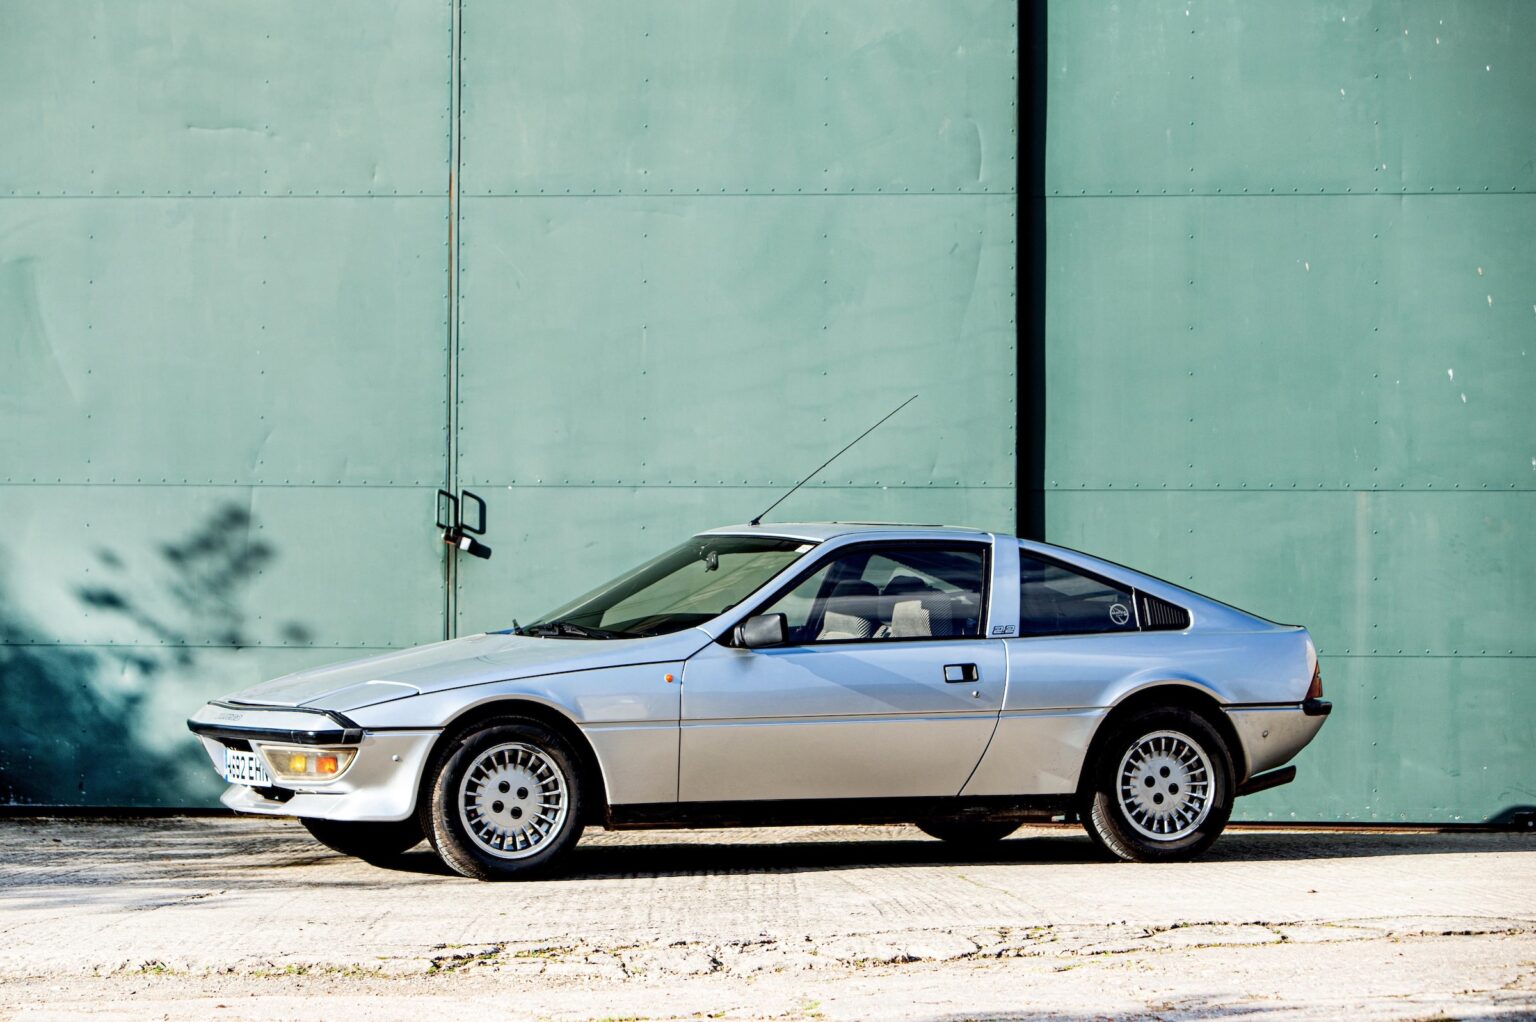 The Matra Murena – A Rare (And Affordable) 1980s Mid-Engined Wedge